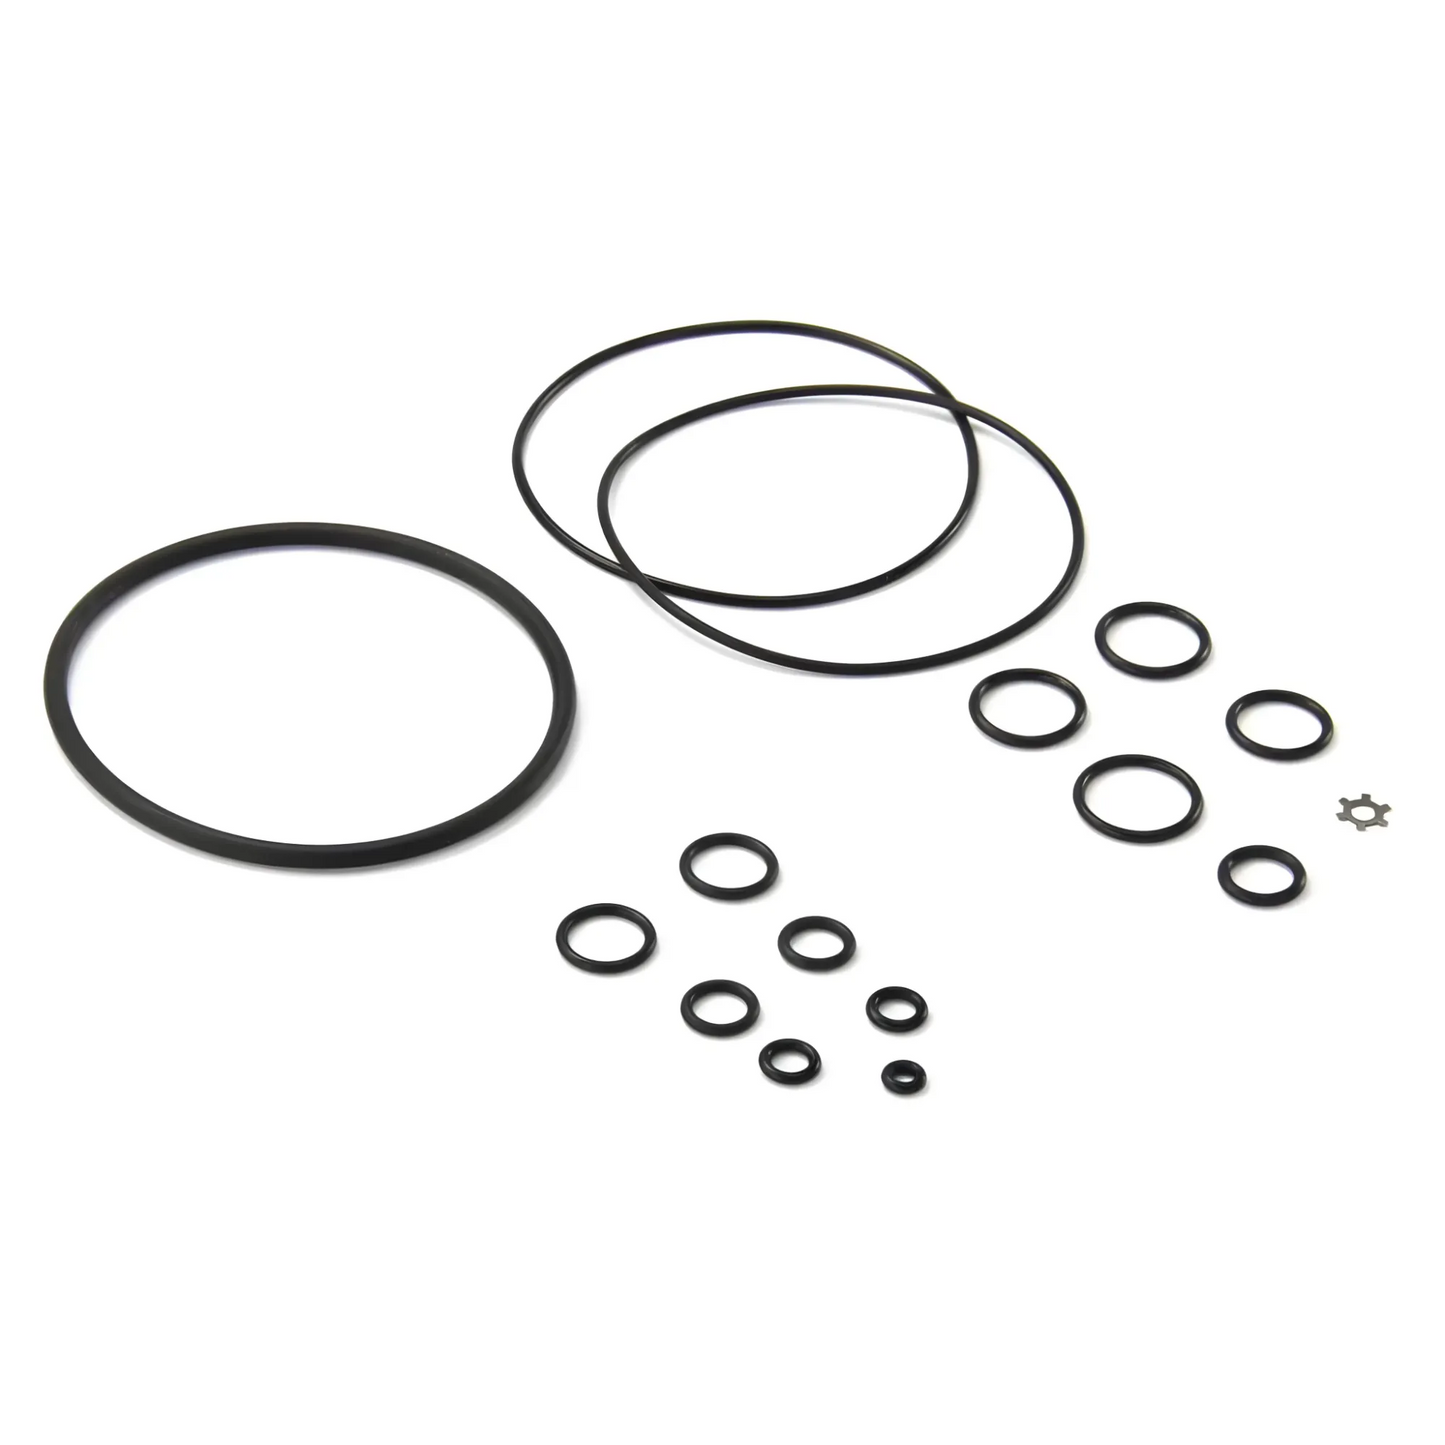 Air Drive Section Seal Kit for Nitrous Pump